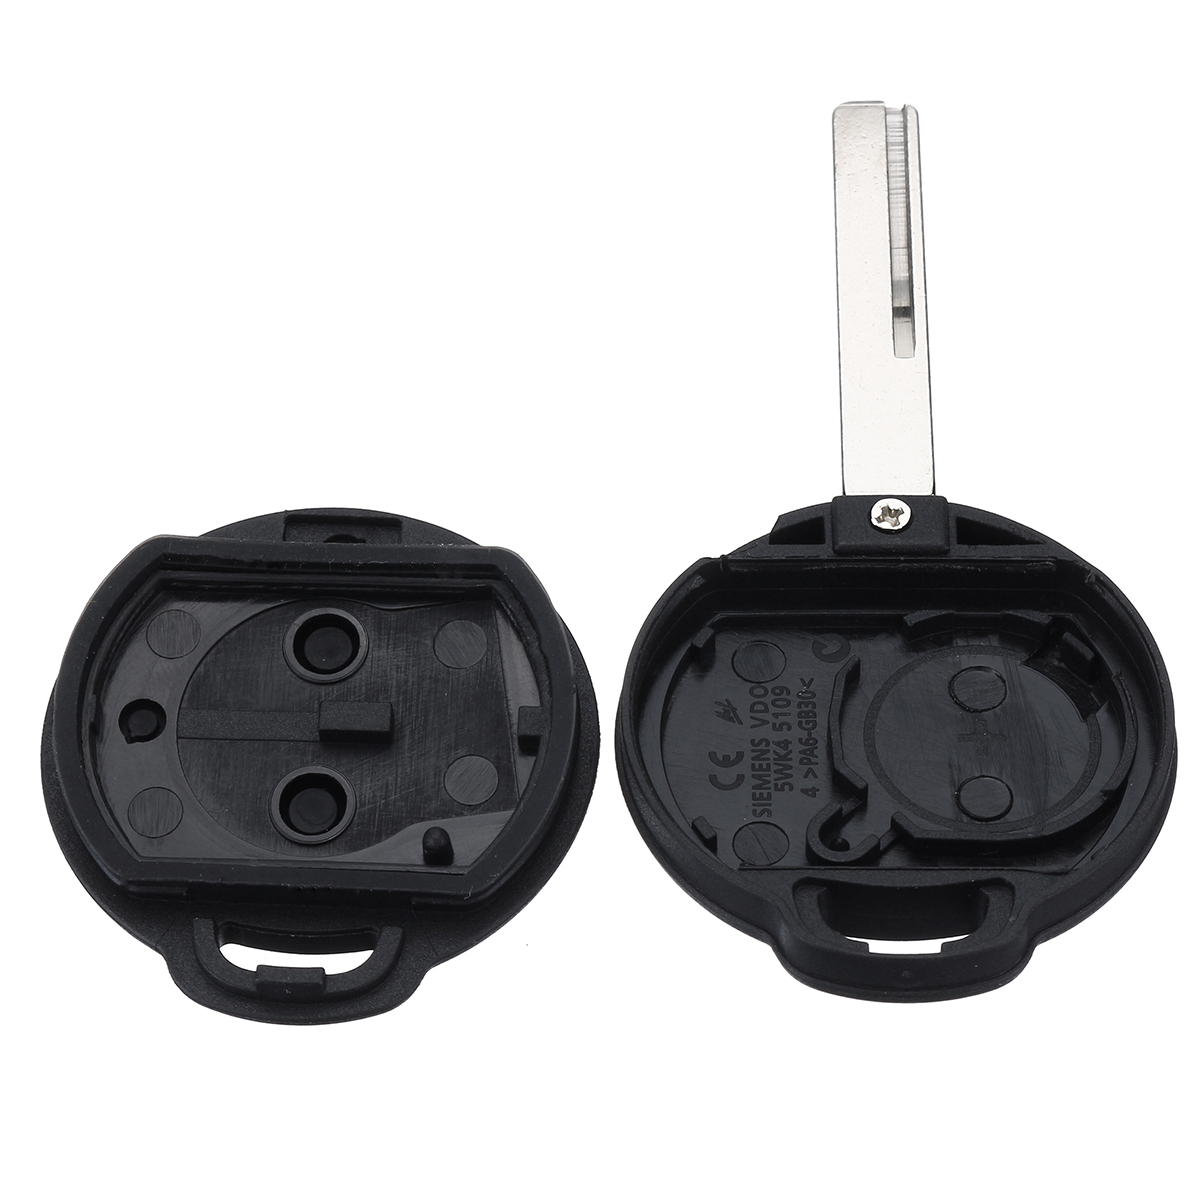 2 Buttons Remote Key Case Fob Shell for Benz Mercedes Smart Forfour